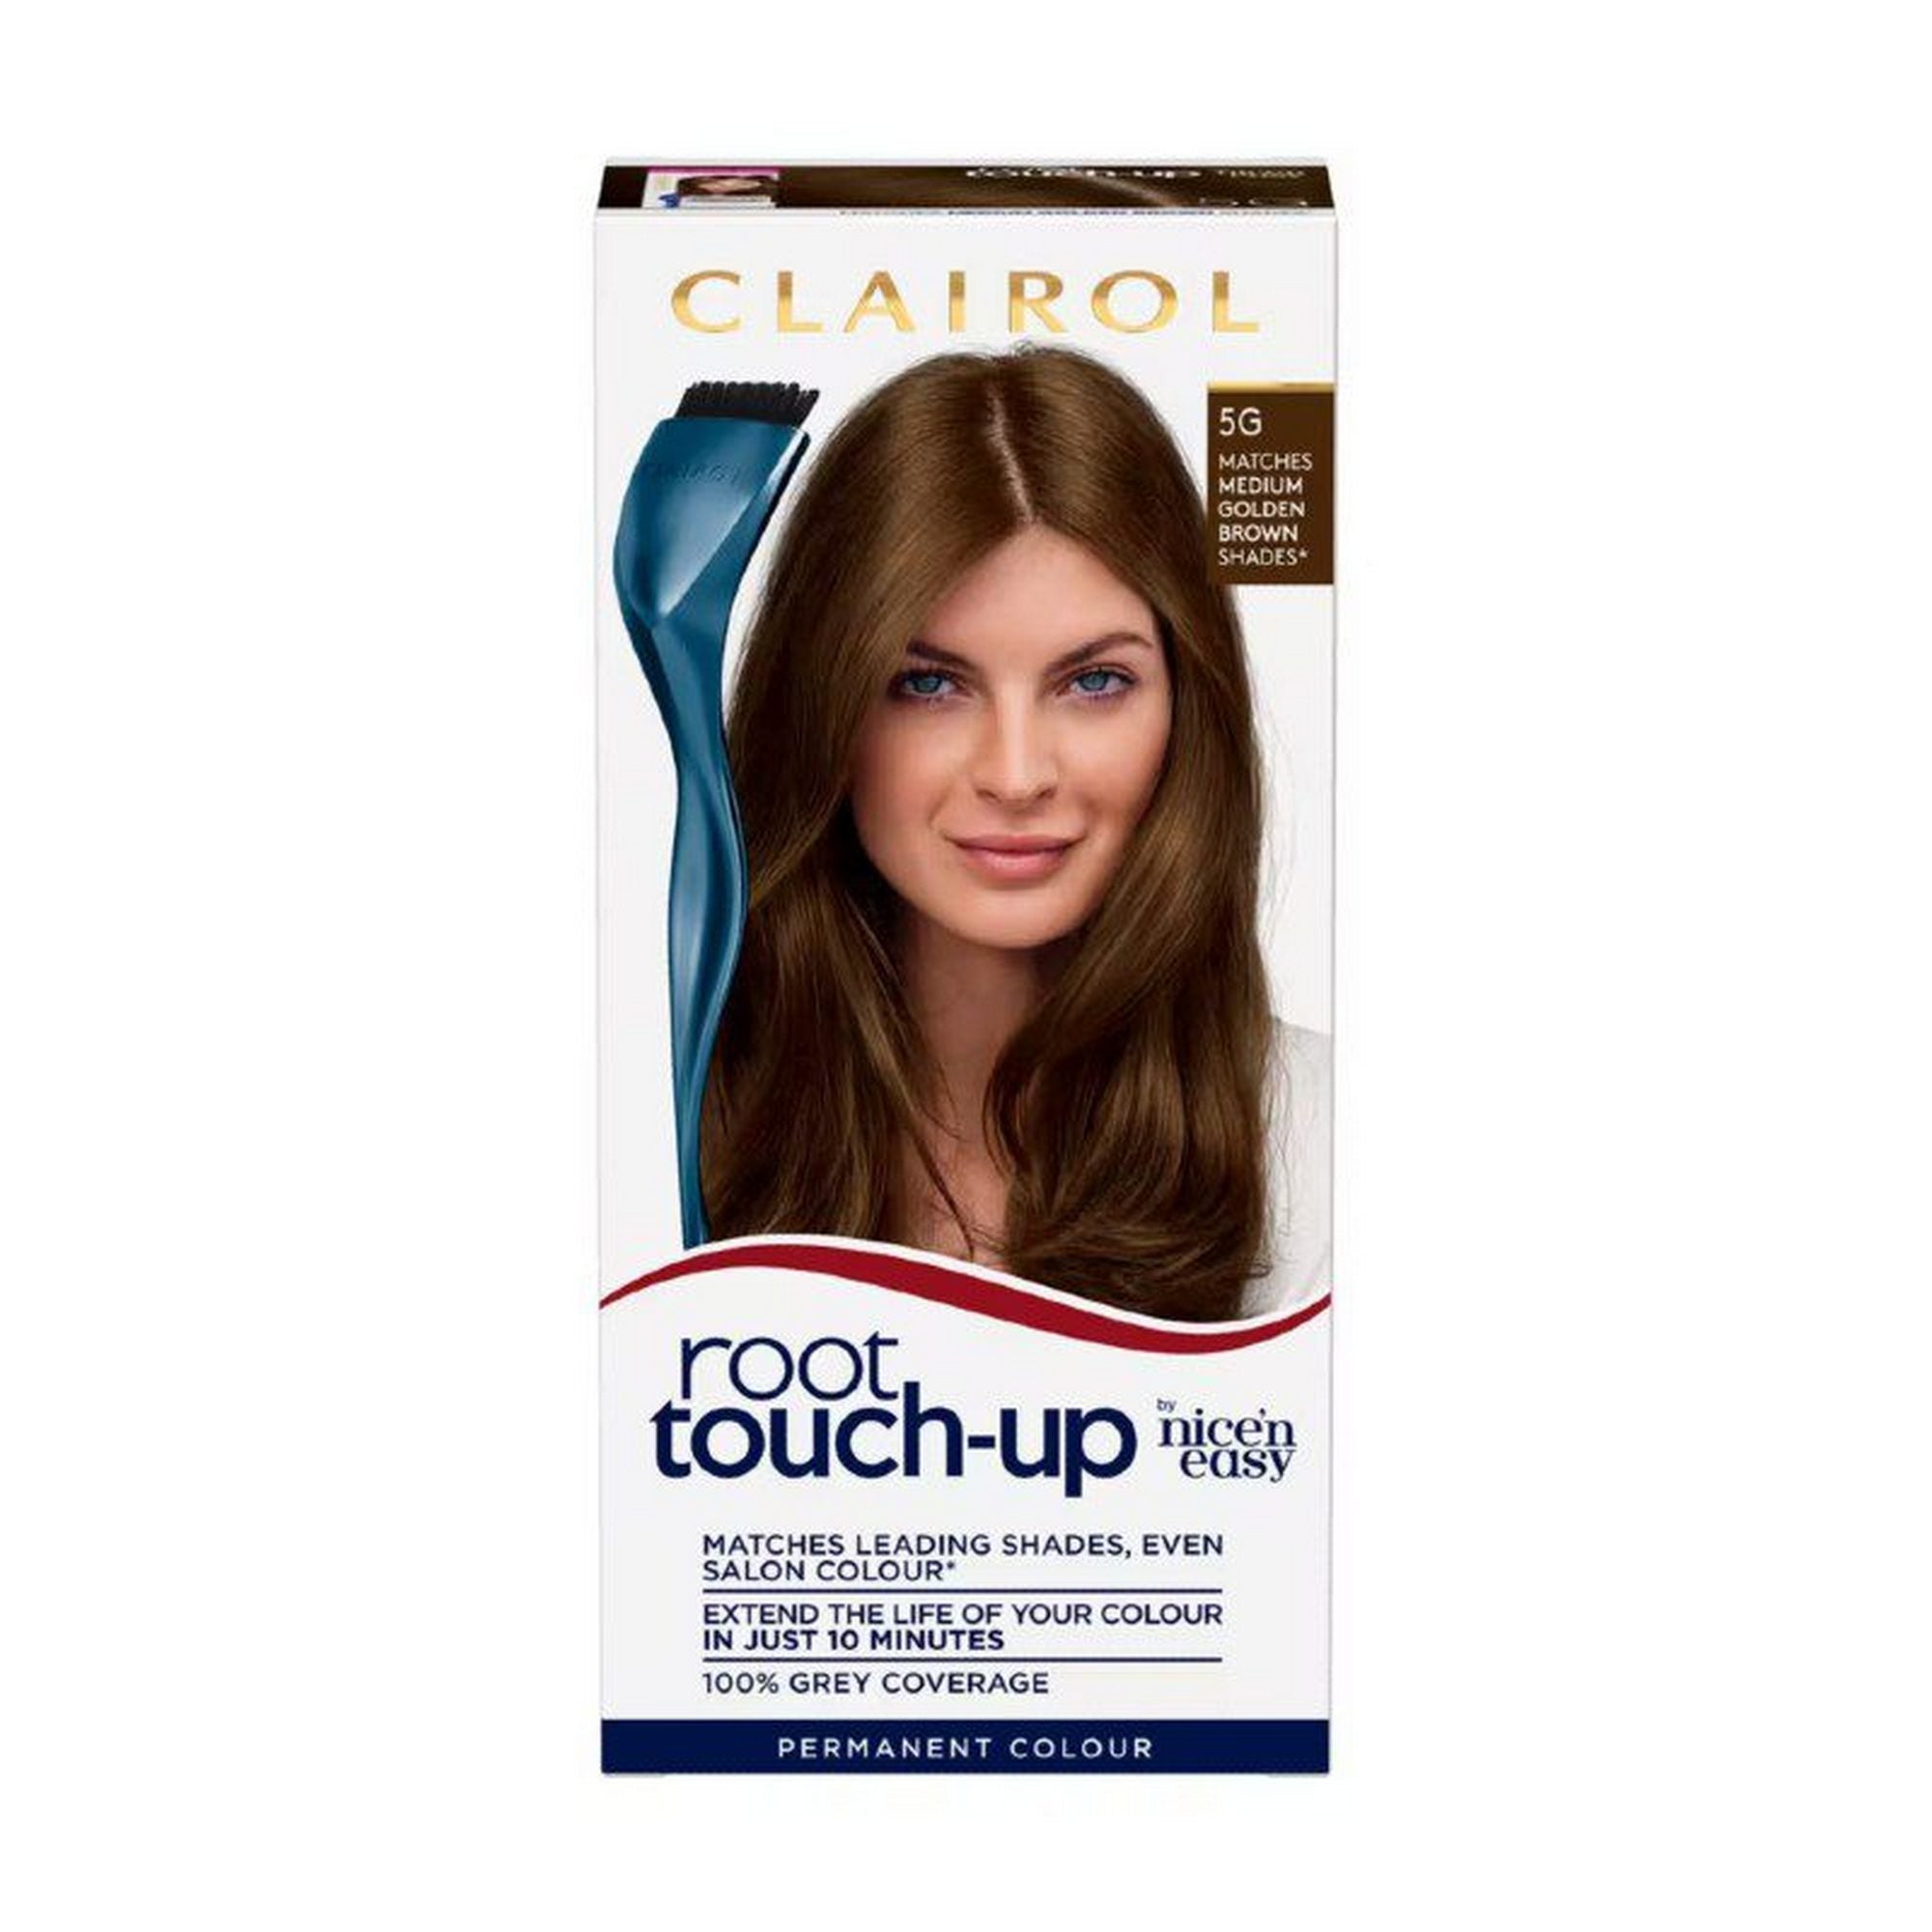 Clairol Nice N Easy Root Touch Up Permanent Hair Dye Medium Golden Brown